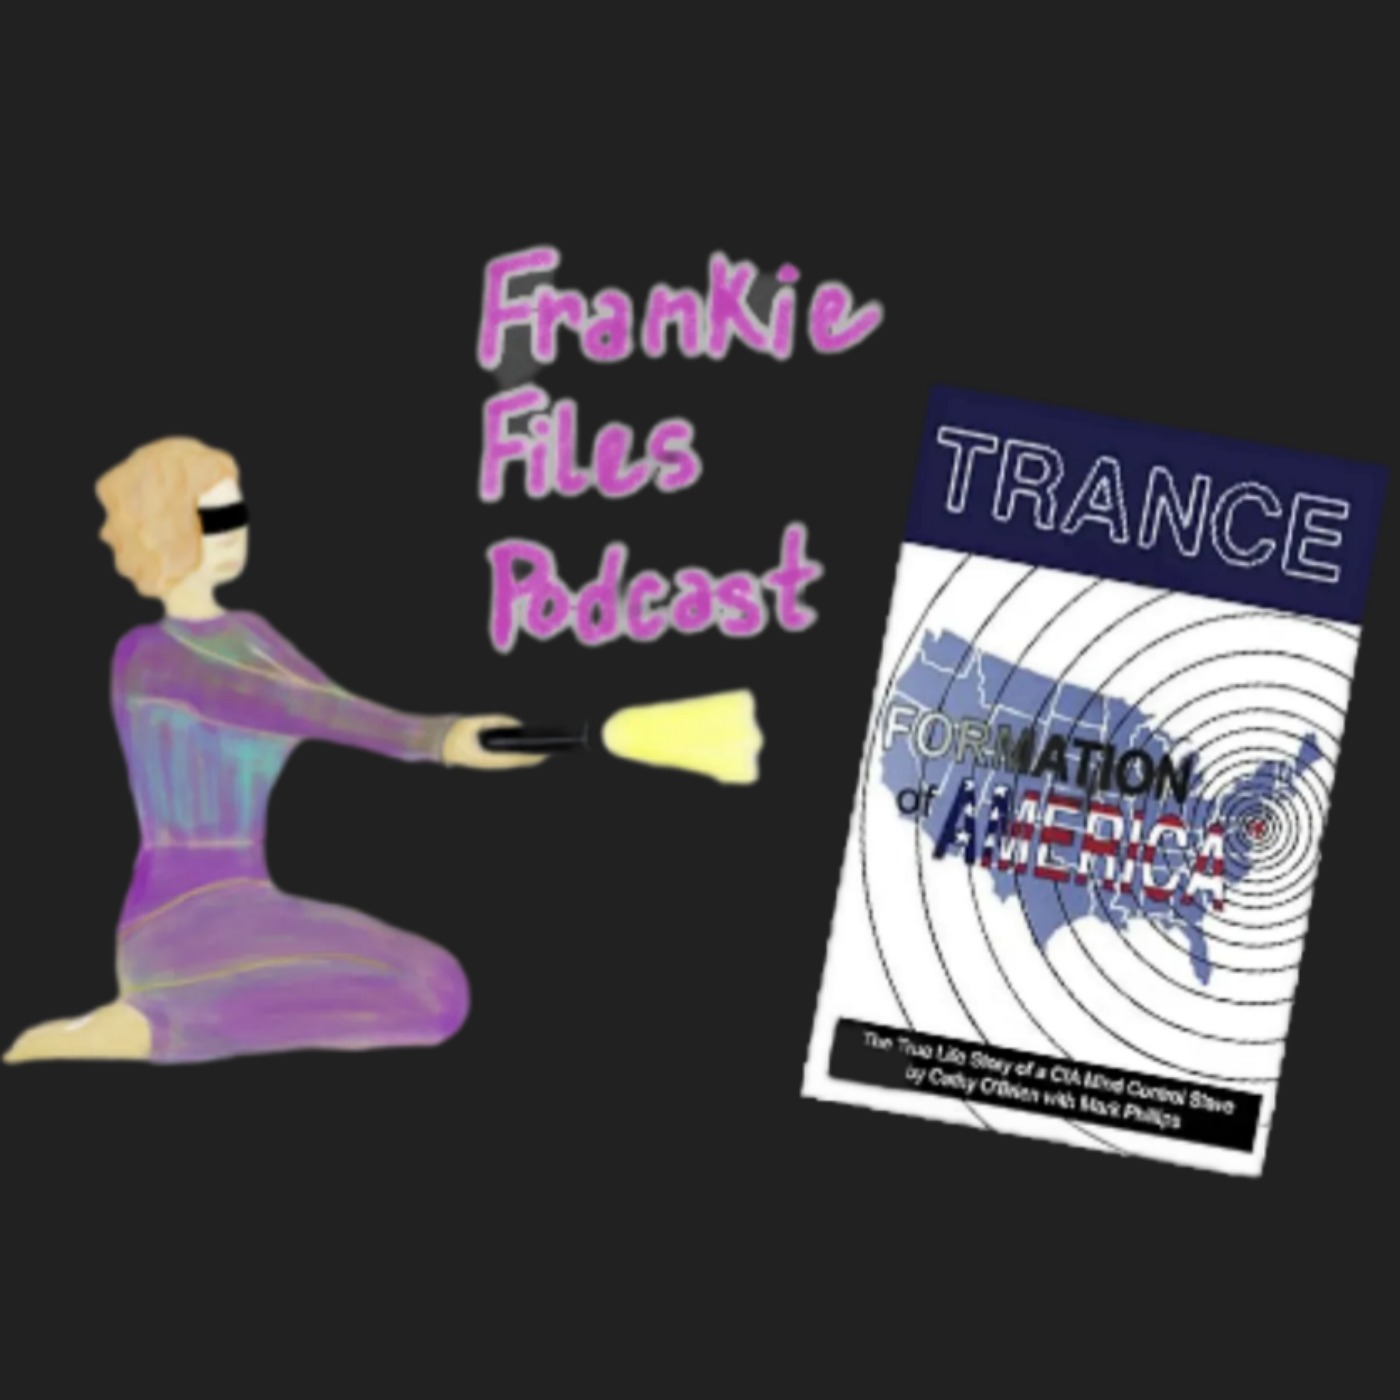 Ep. 86 - Why Mind Control Requires Deprivations - Review Trance Formation of America (Book)